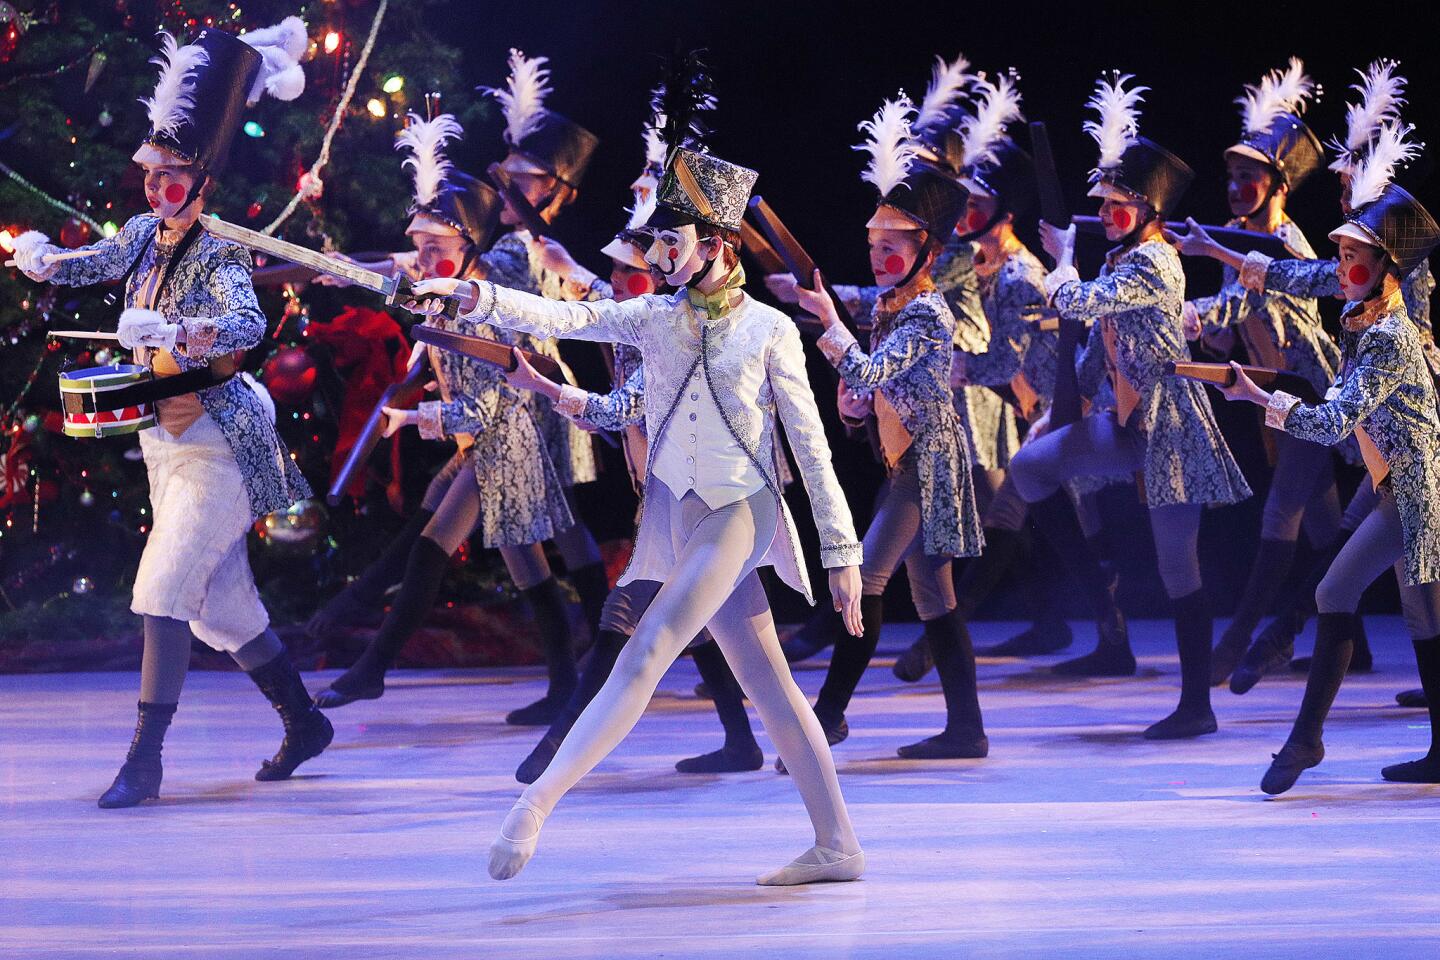 Photo Gallery: Opening night for The Nutcracker at the Alex Theatre in Glendale